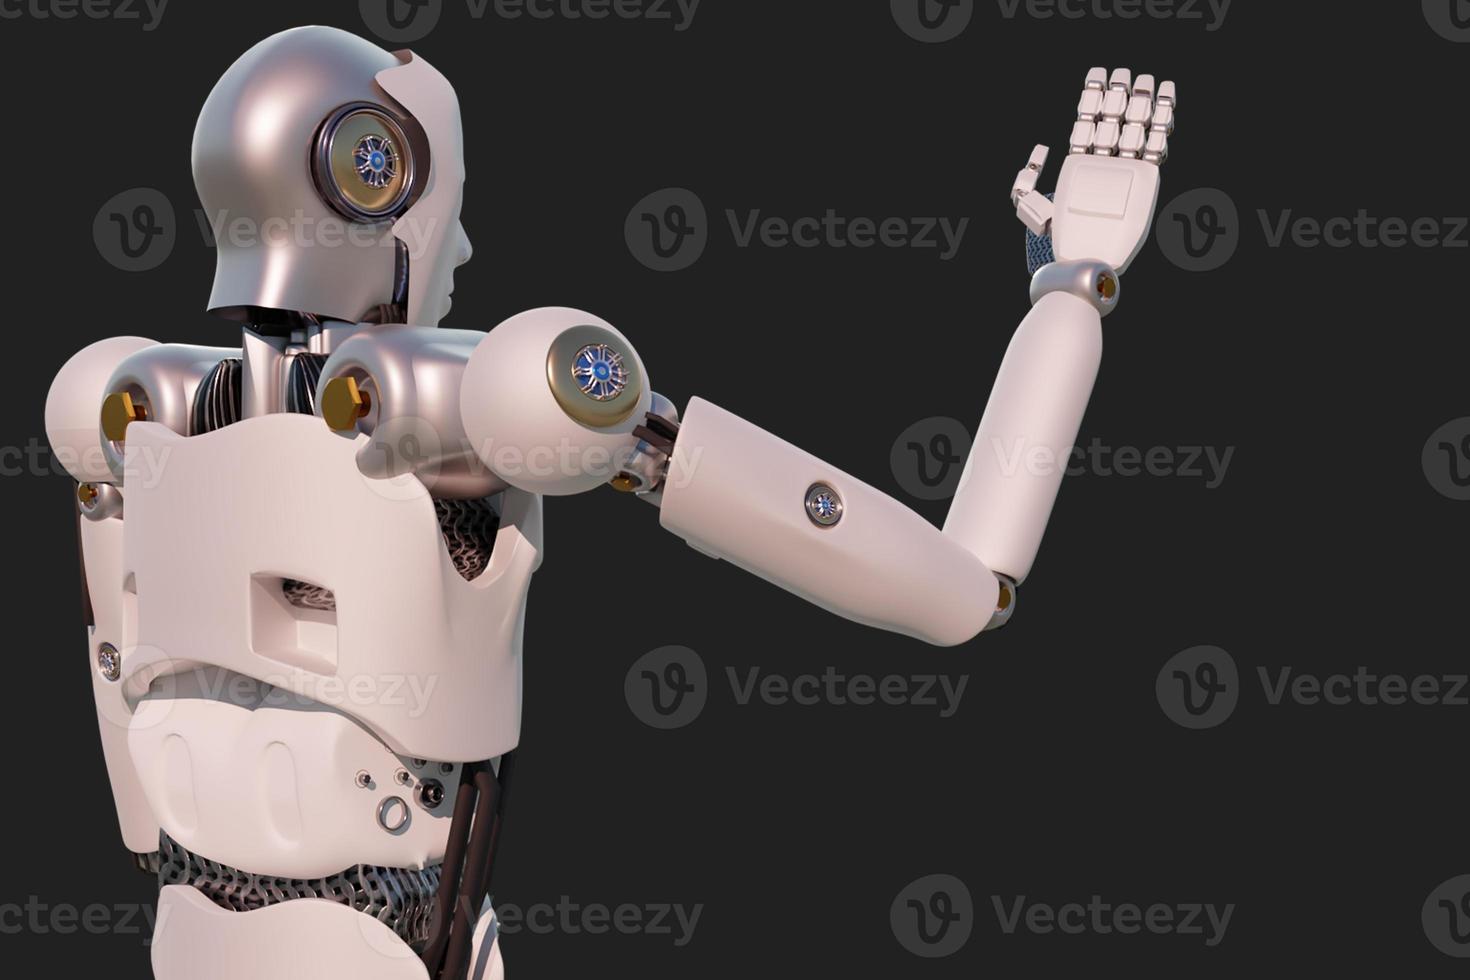 Robot metaverse VR avatar reality game virtual reality of people blockchain technology investment, business lifestyle virtual reality vr world connection cyber avatar metaverse people 2022 3D RENDER photo